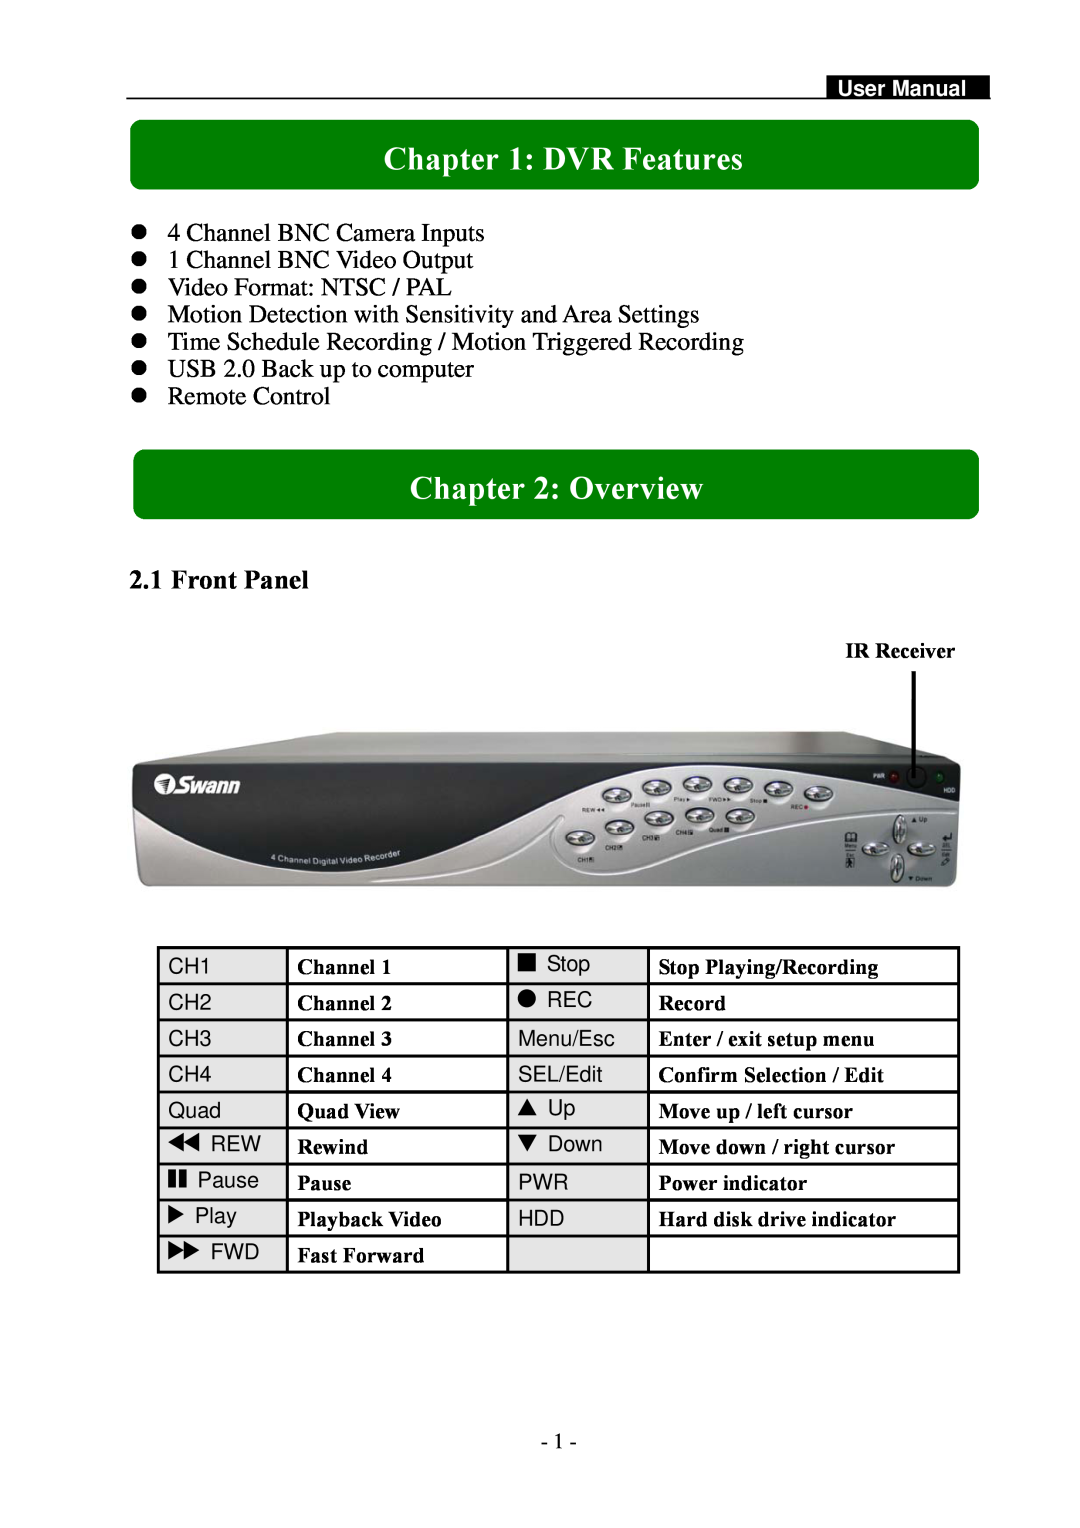 Swann SW242-2LP user manual DVR Features, Overview, Front Panel 